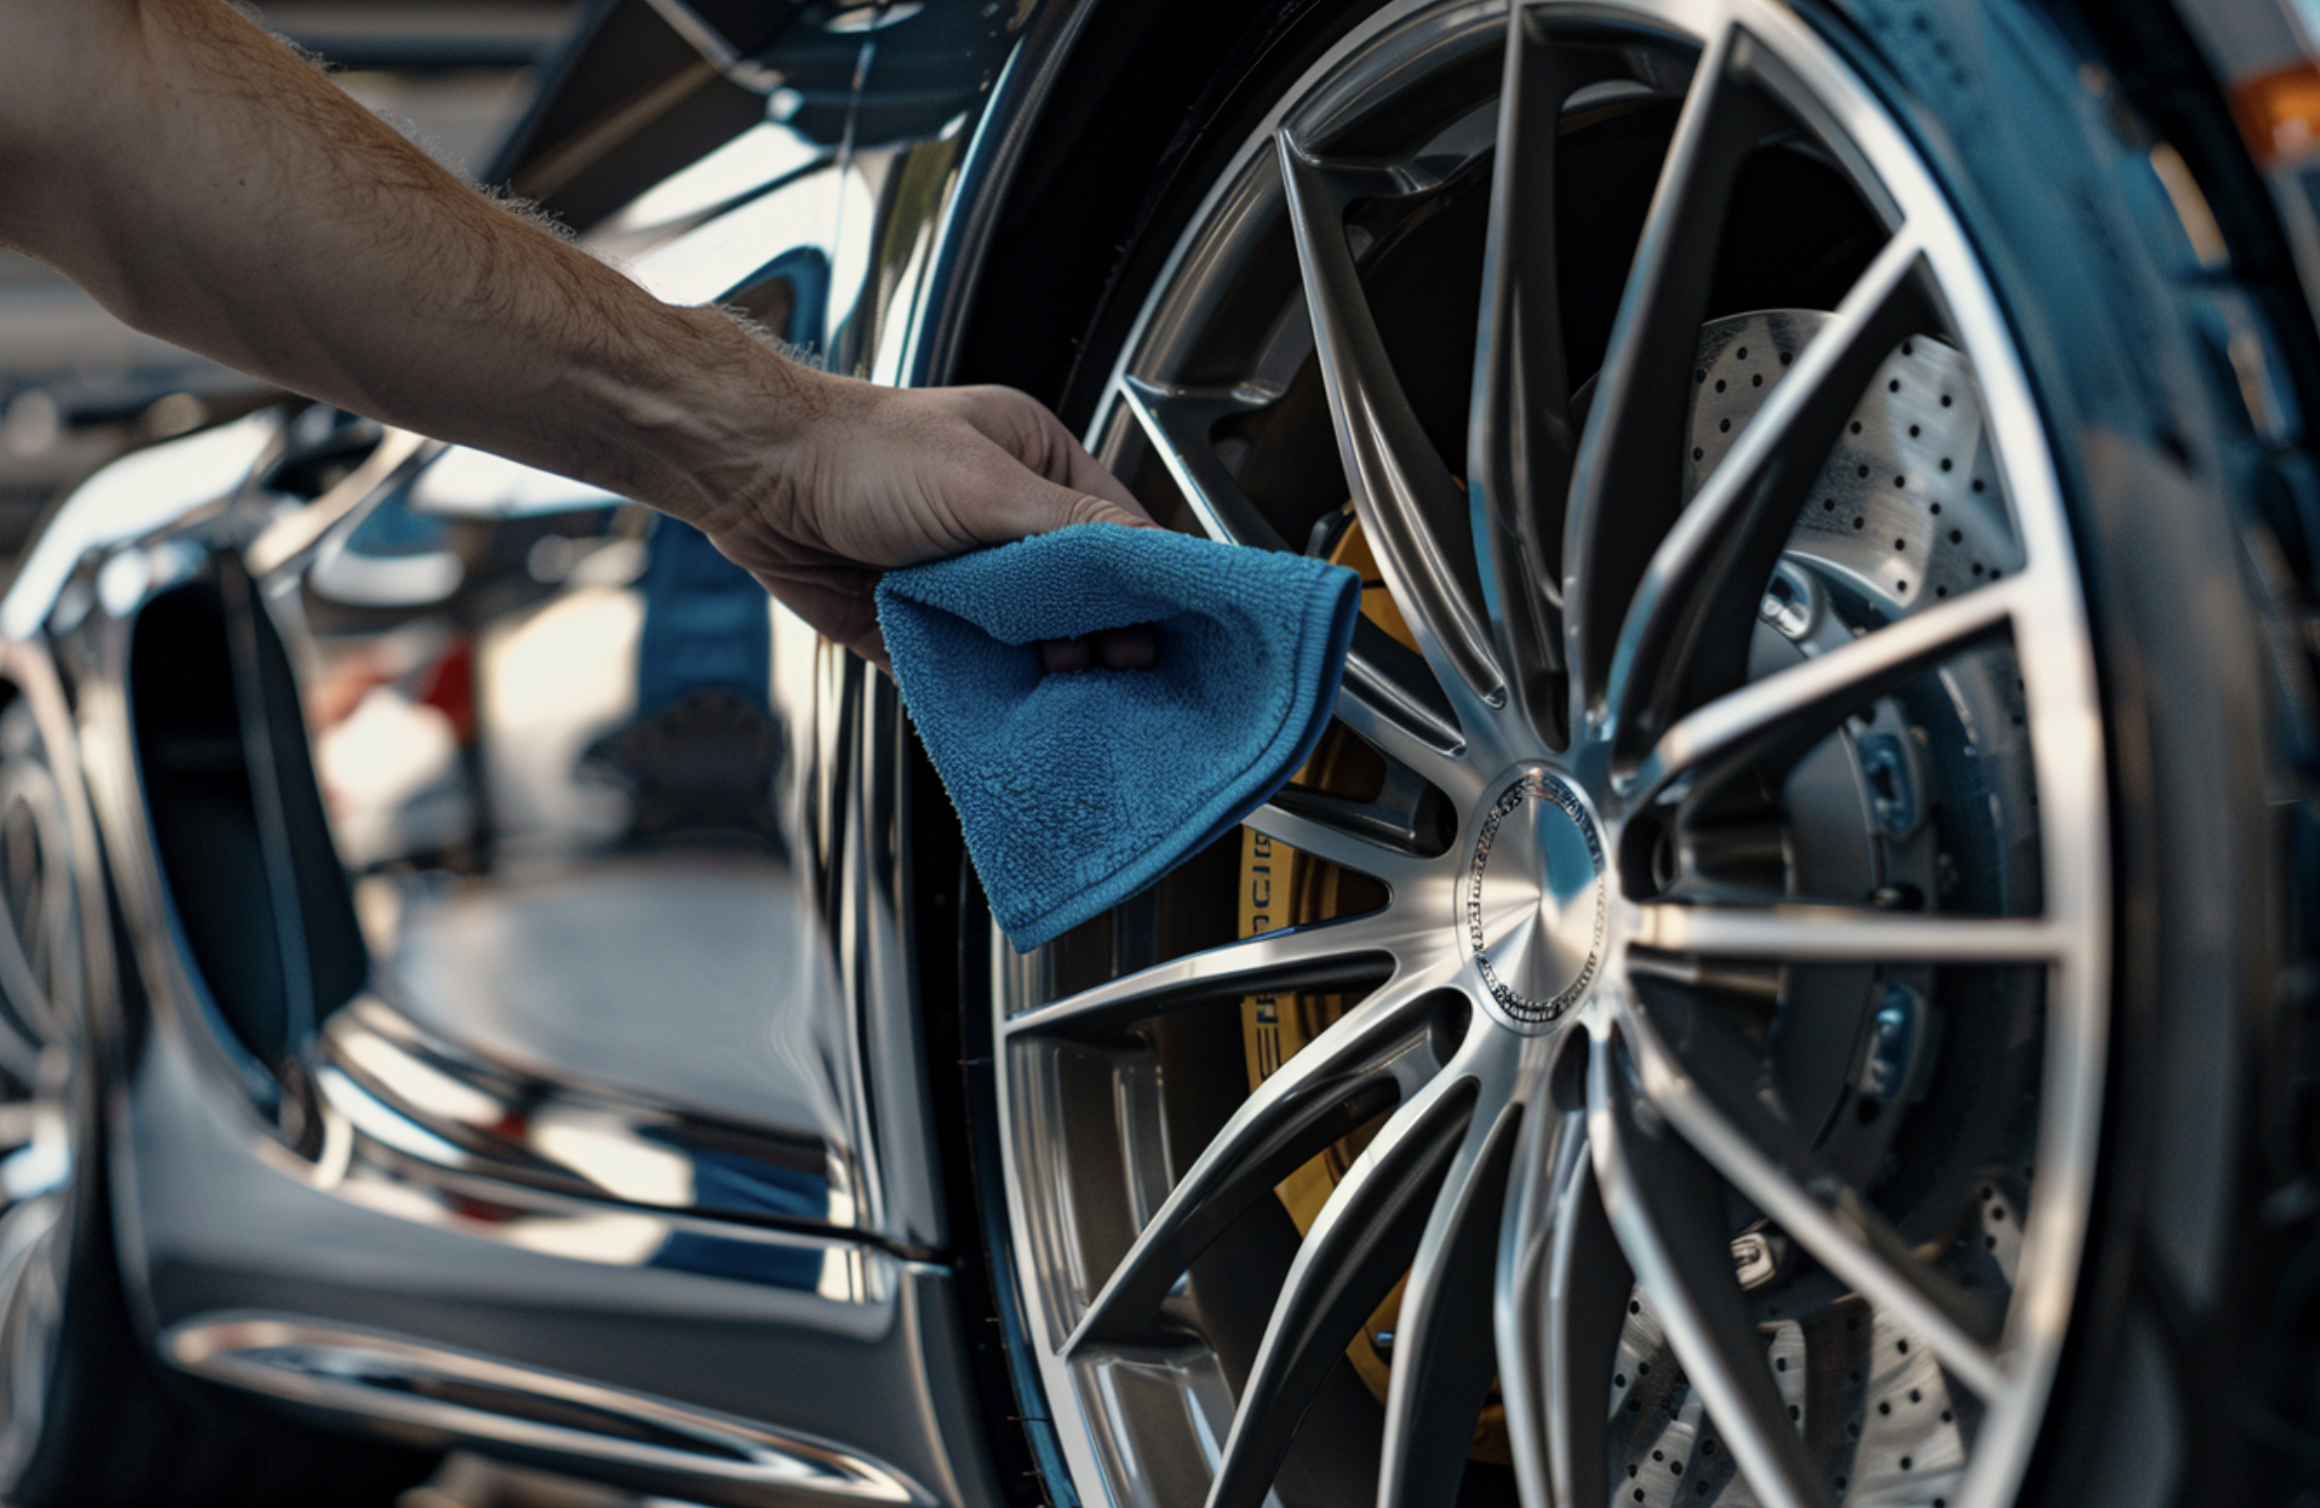 How to Take Care of Your Wheels?